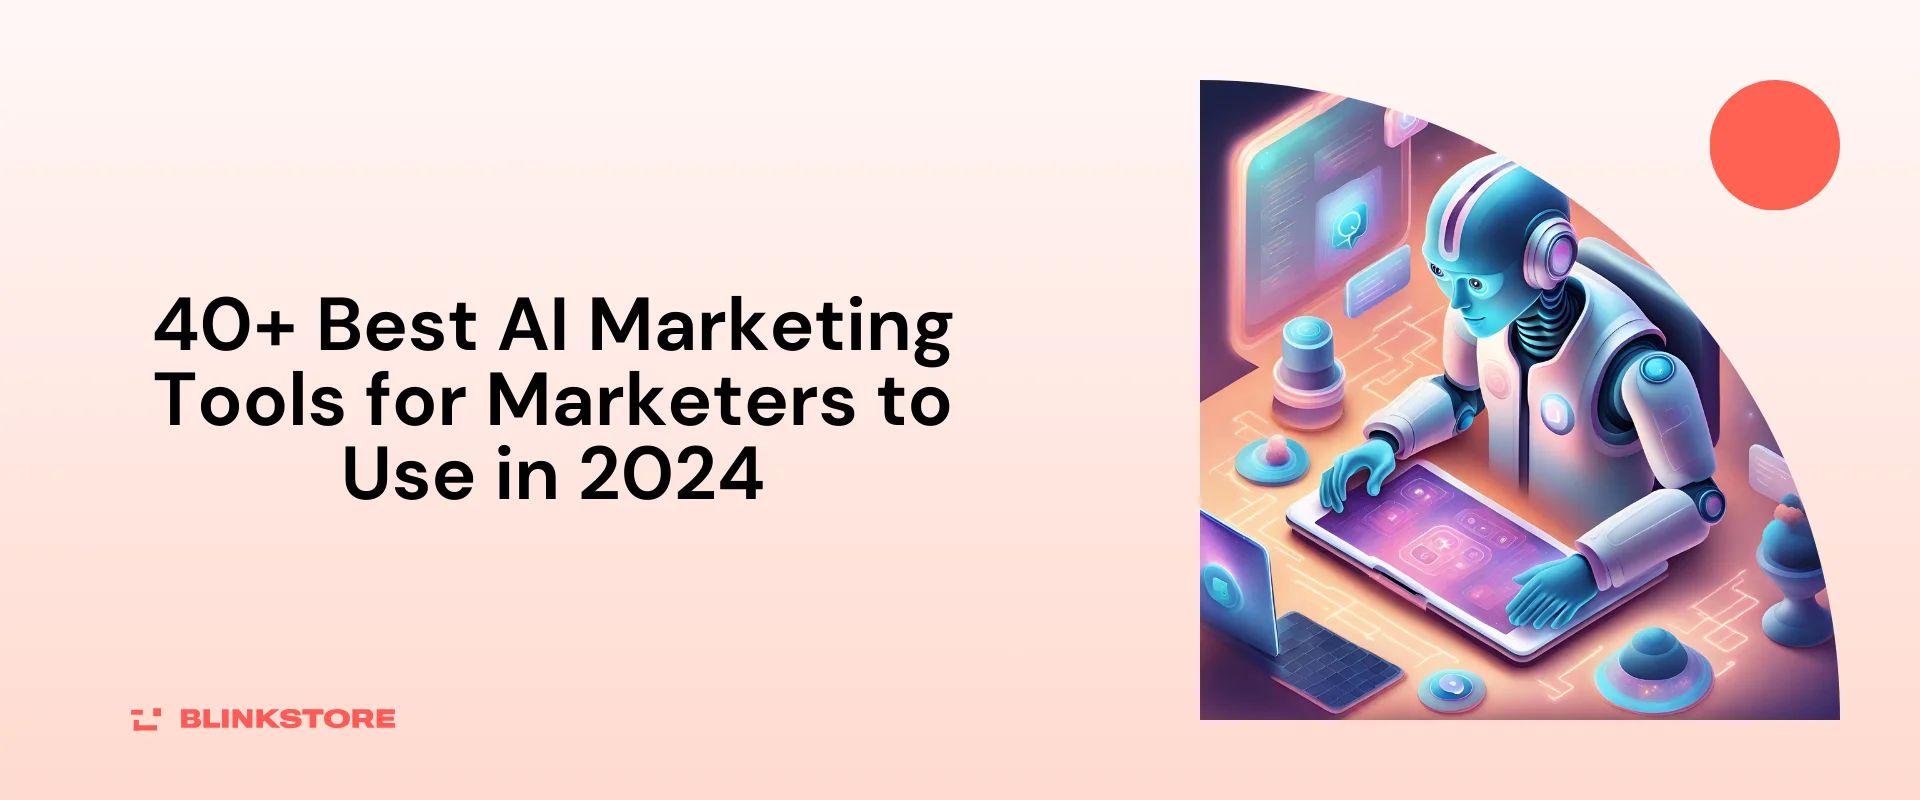 40+ Best AI Marketing Tools for Marketers to Use in 2024